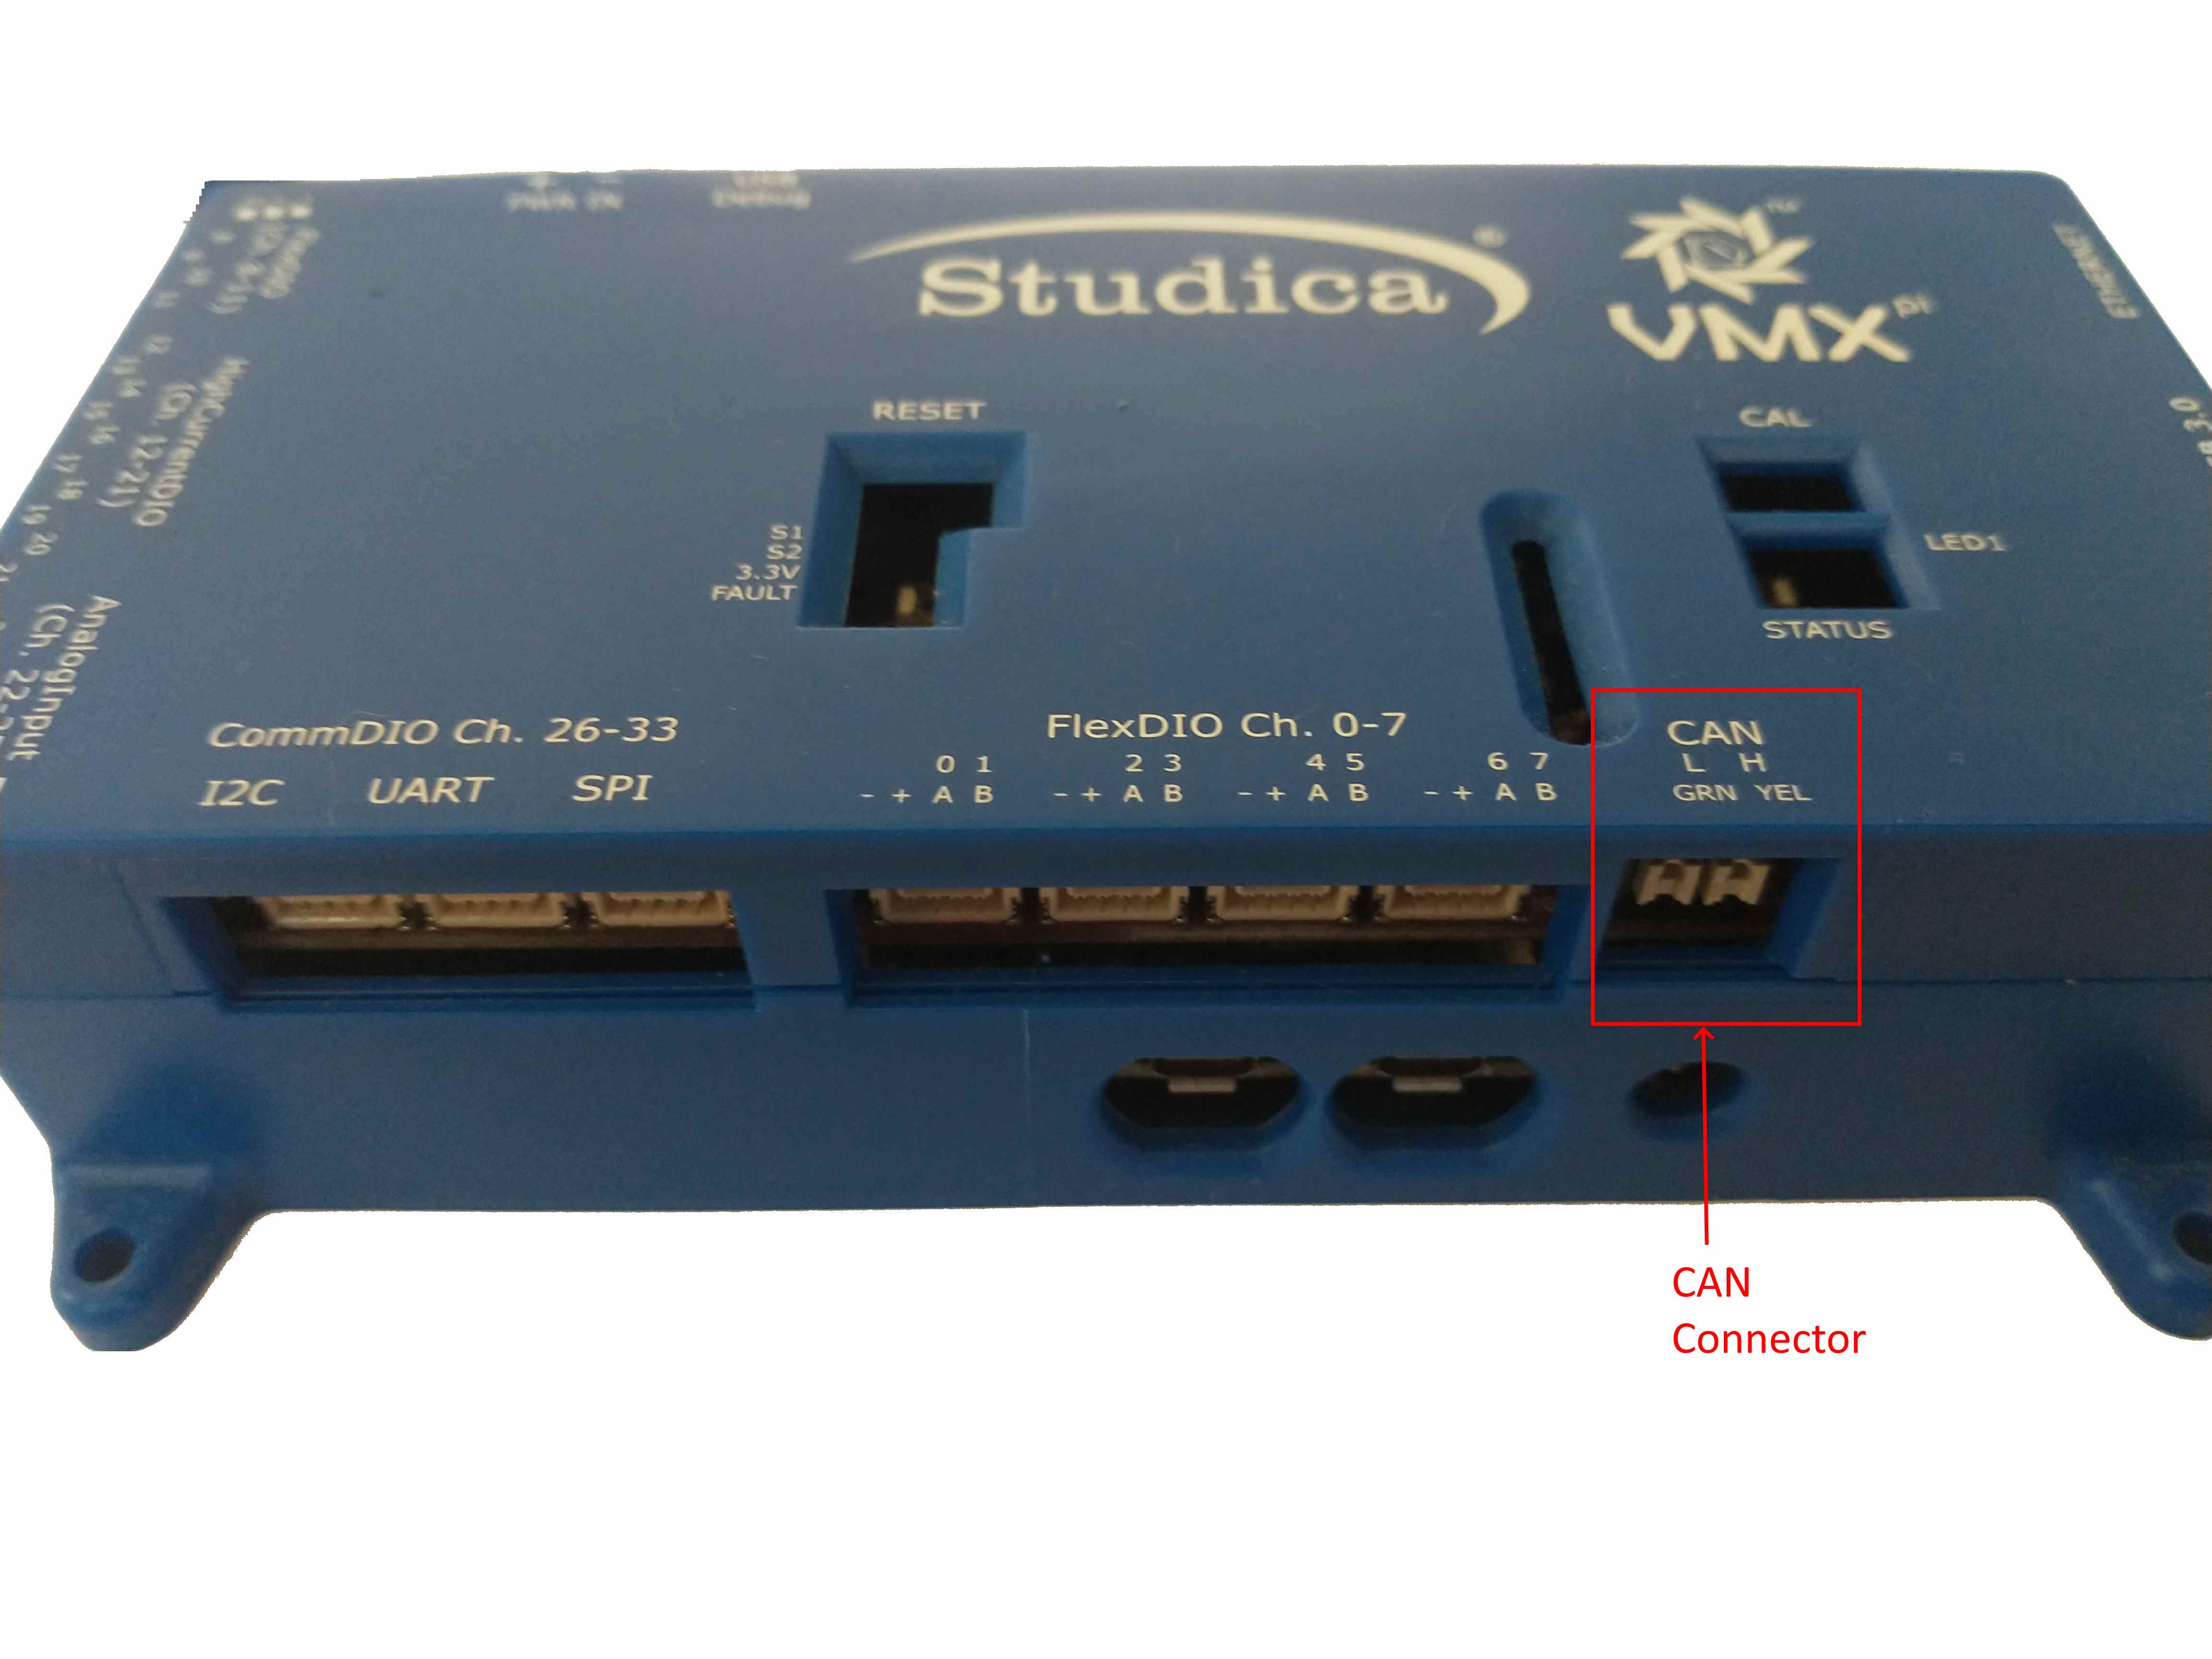 ../../_images/CommDIO_FlexDIO_And_CAN_Connectors_Trimmed_CAN_Connector_Annotated.jpg